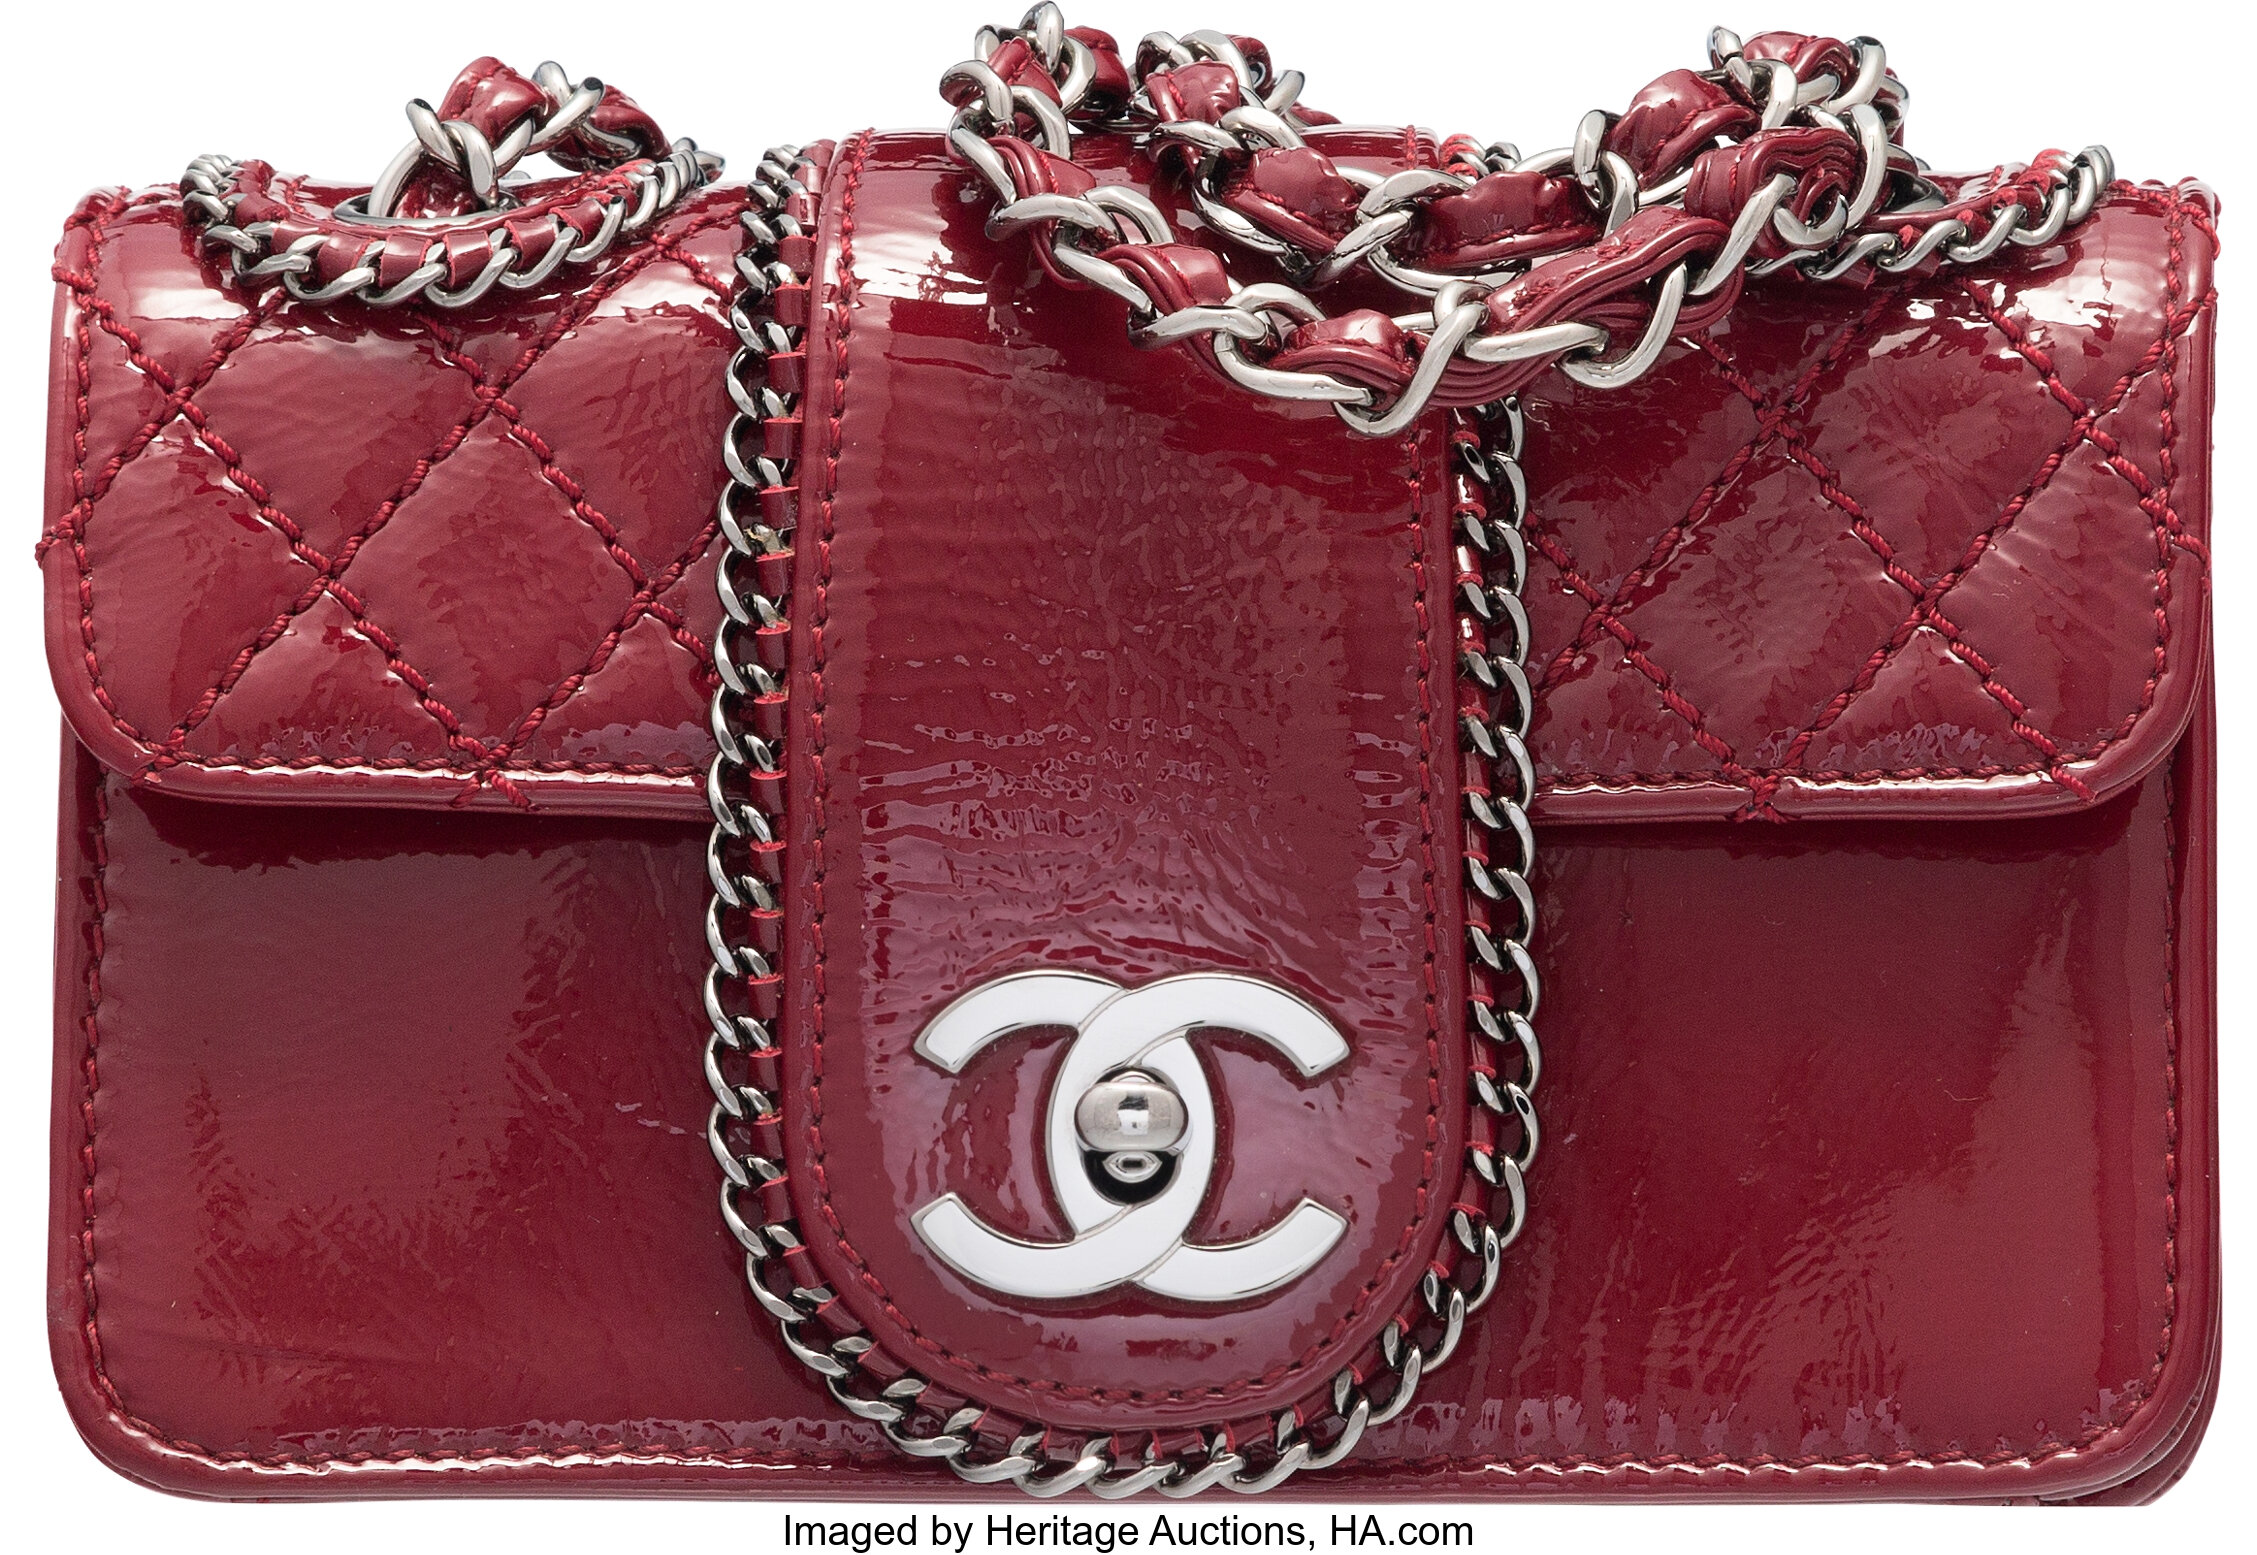 Chanel Red Patent Leather Mini Madison Flap Bag with Ruthenium | Lot #58018  | Heritage Auctions